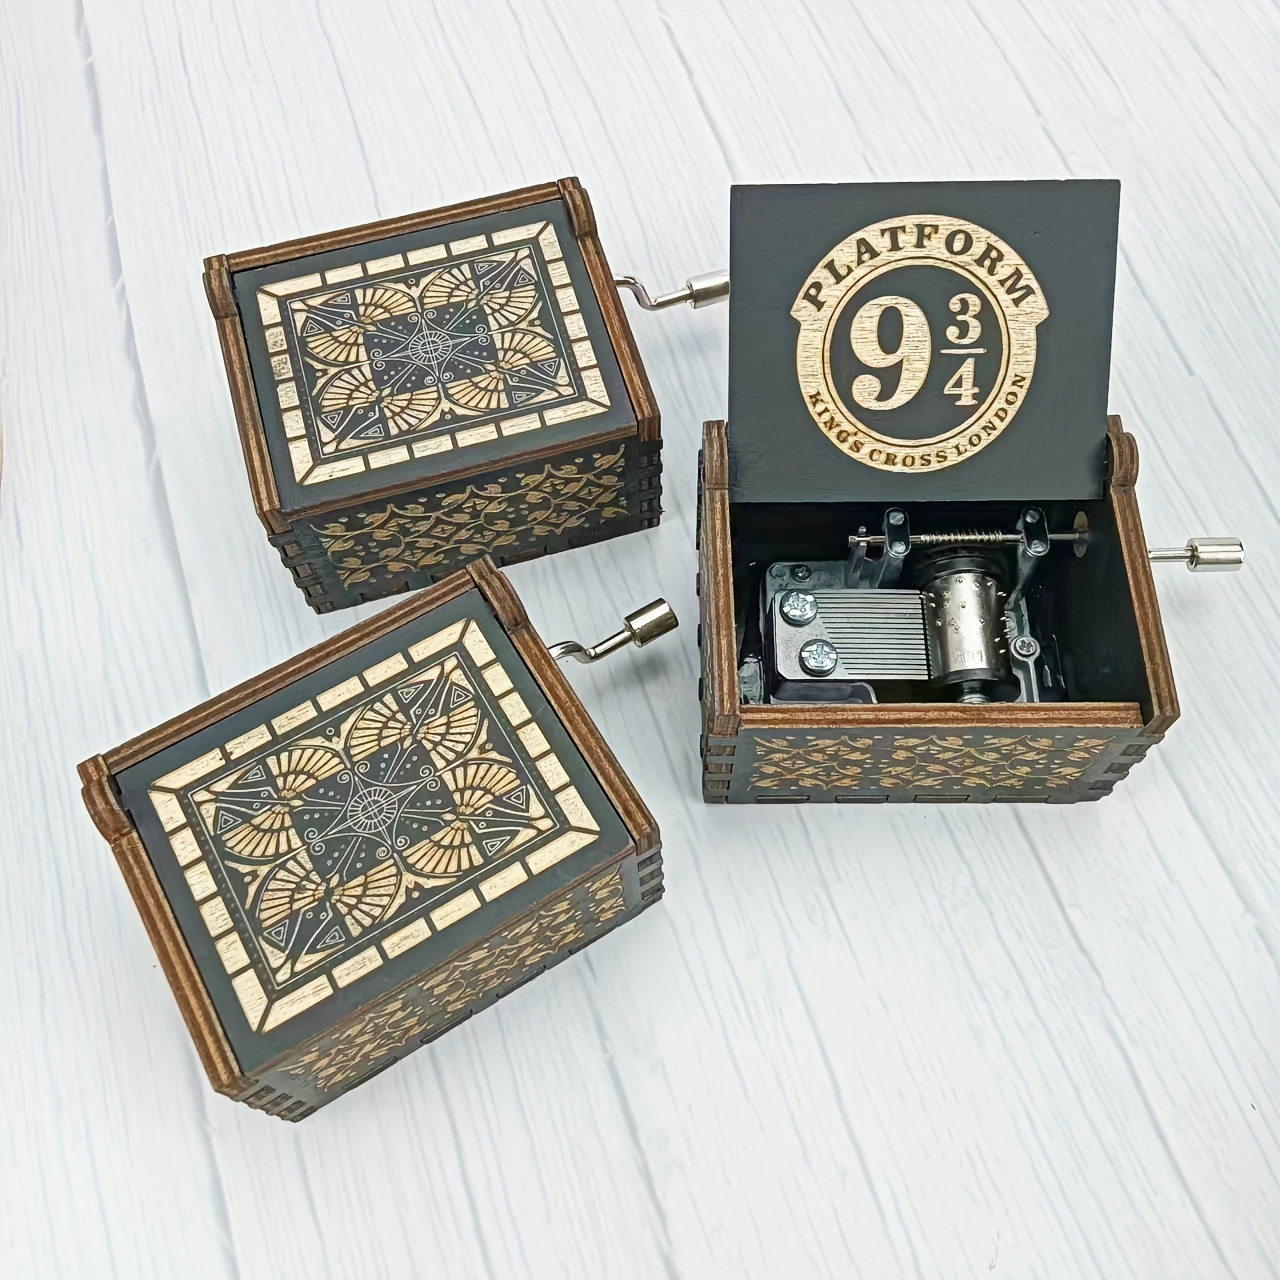 1pc Hand-cranked Wooden Music Box - Perfect Retro Gift For Weddings, Valentine's Day, Christmas, And Birthdays (black)